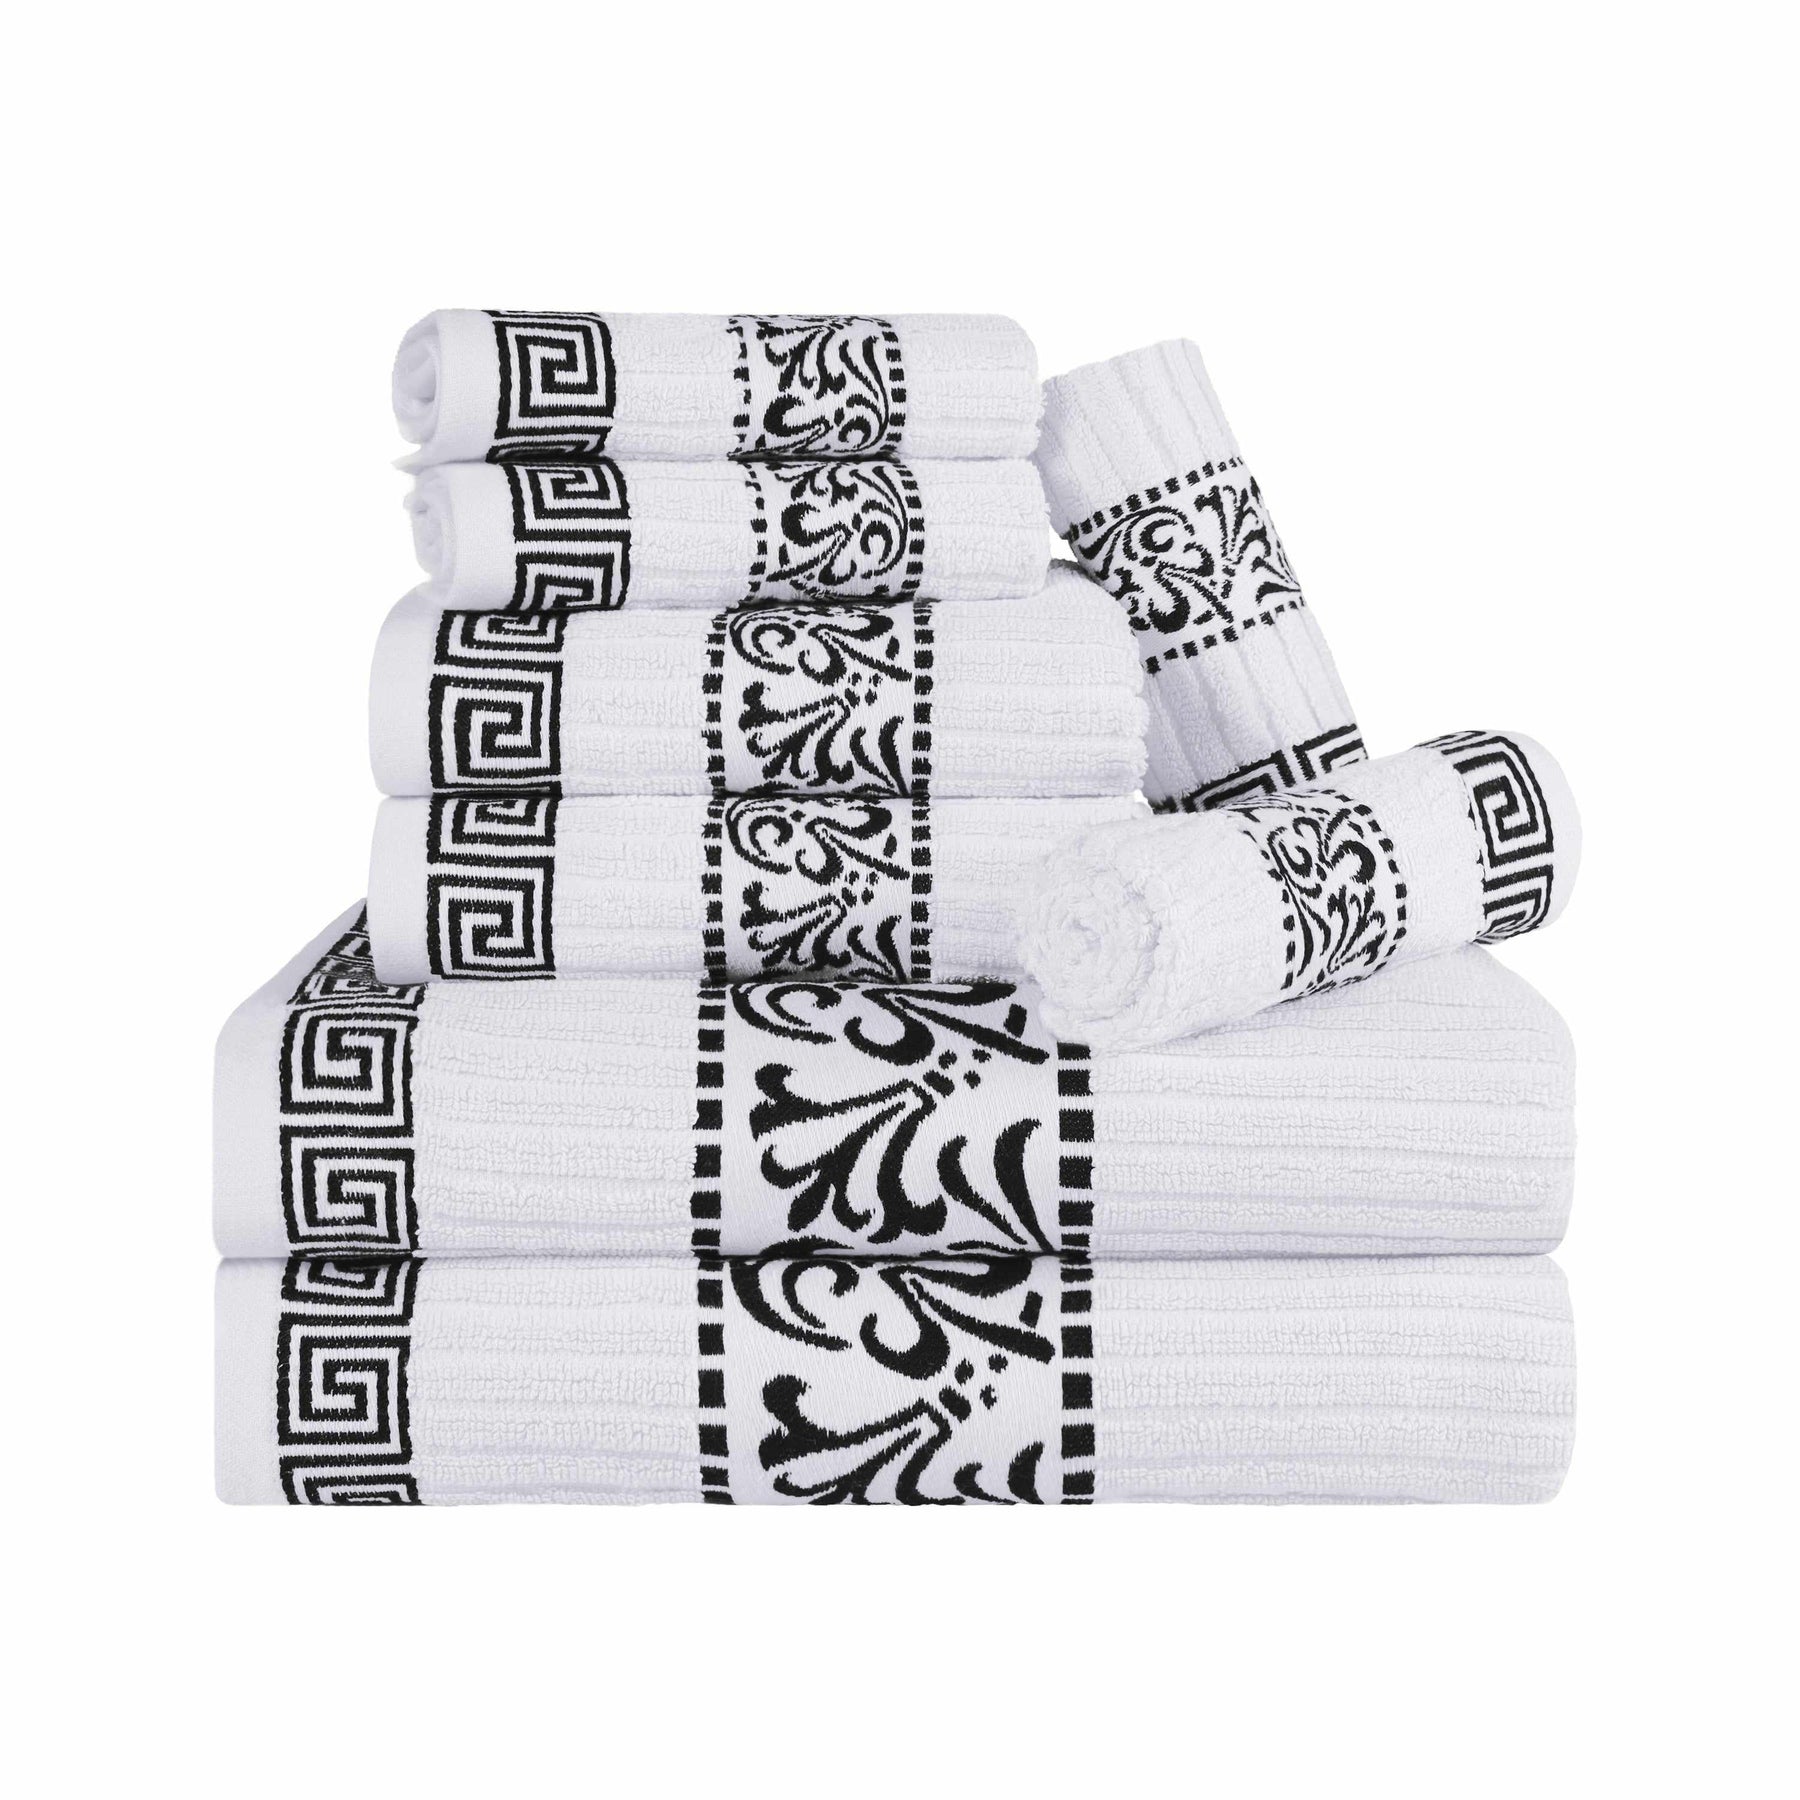 Superior Athens Cotton 8-Piece Towel Set with Greek Scroll and Floral Pattern - White-Black